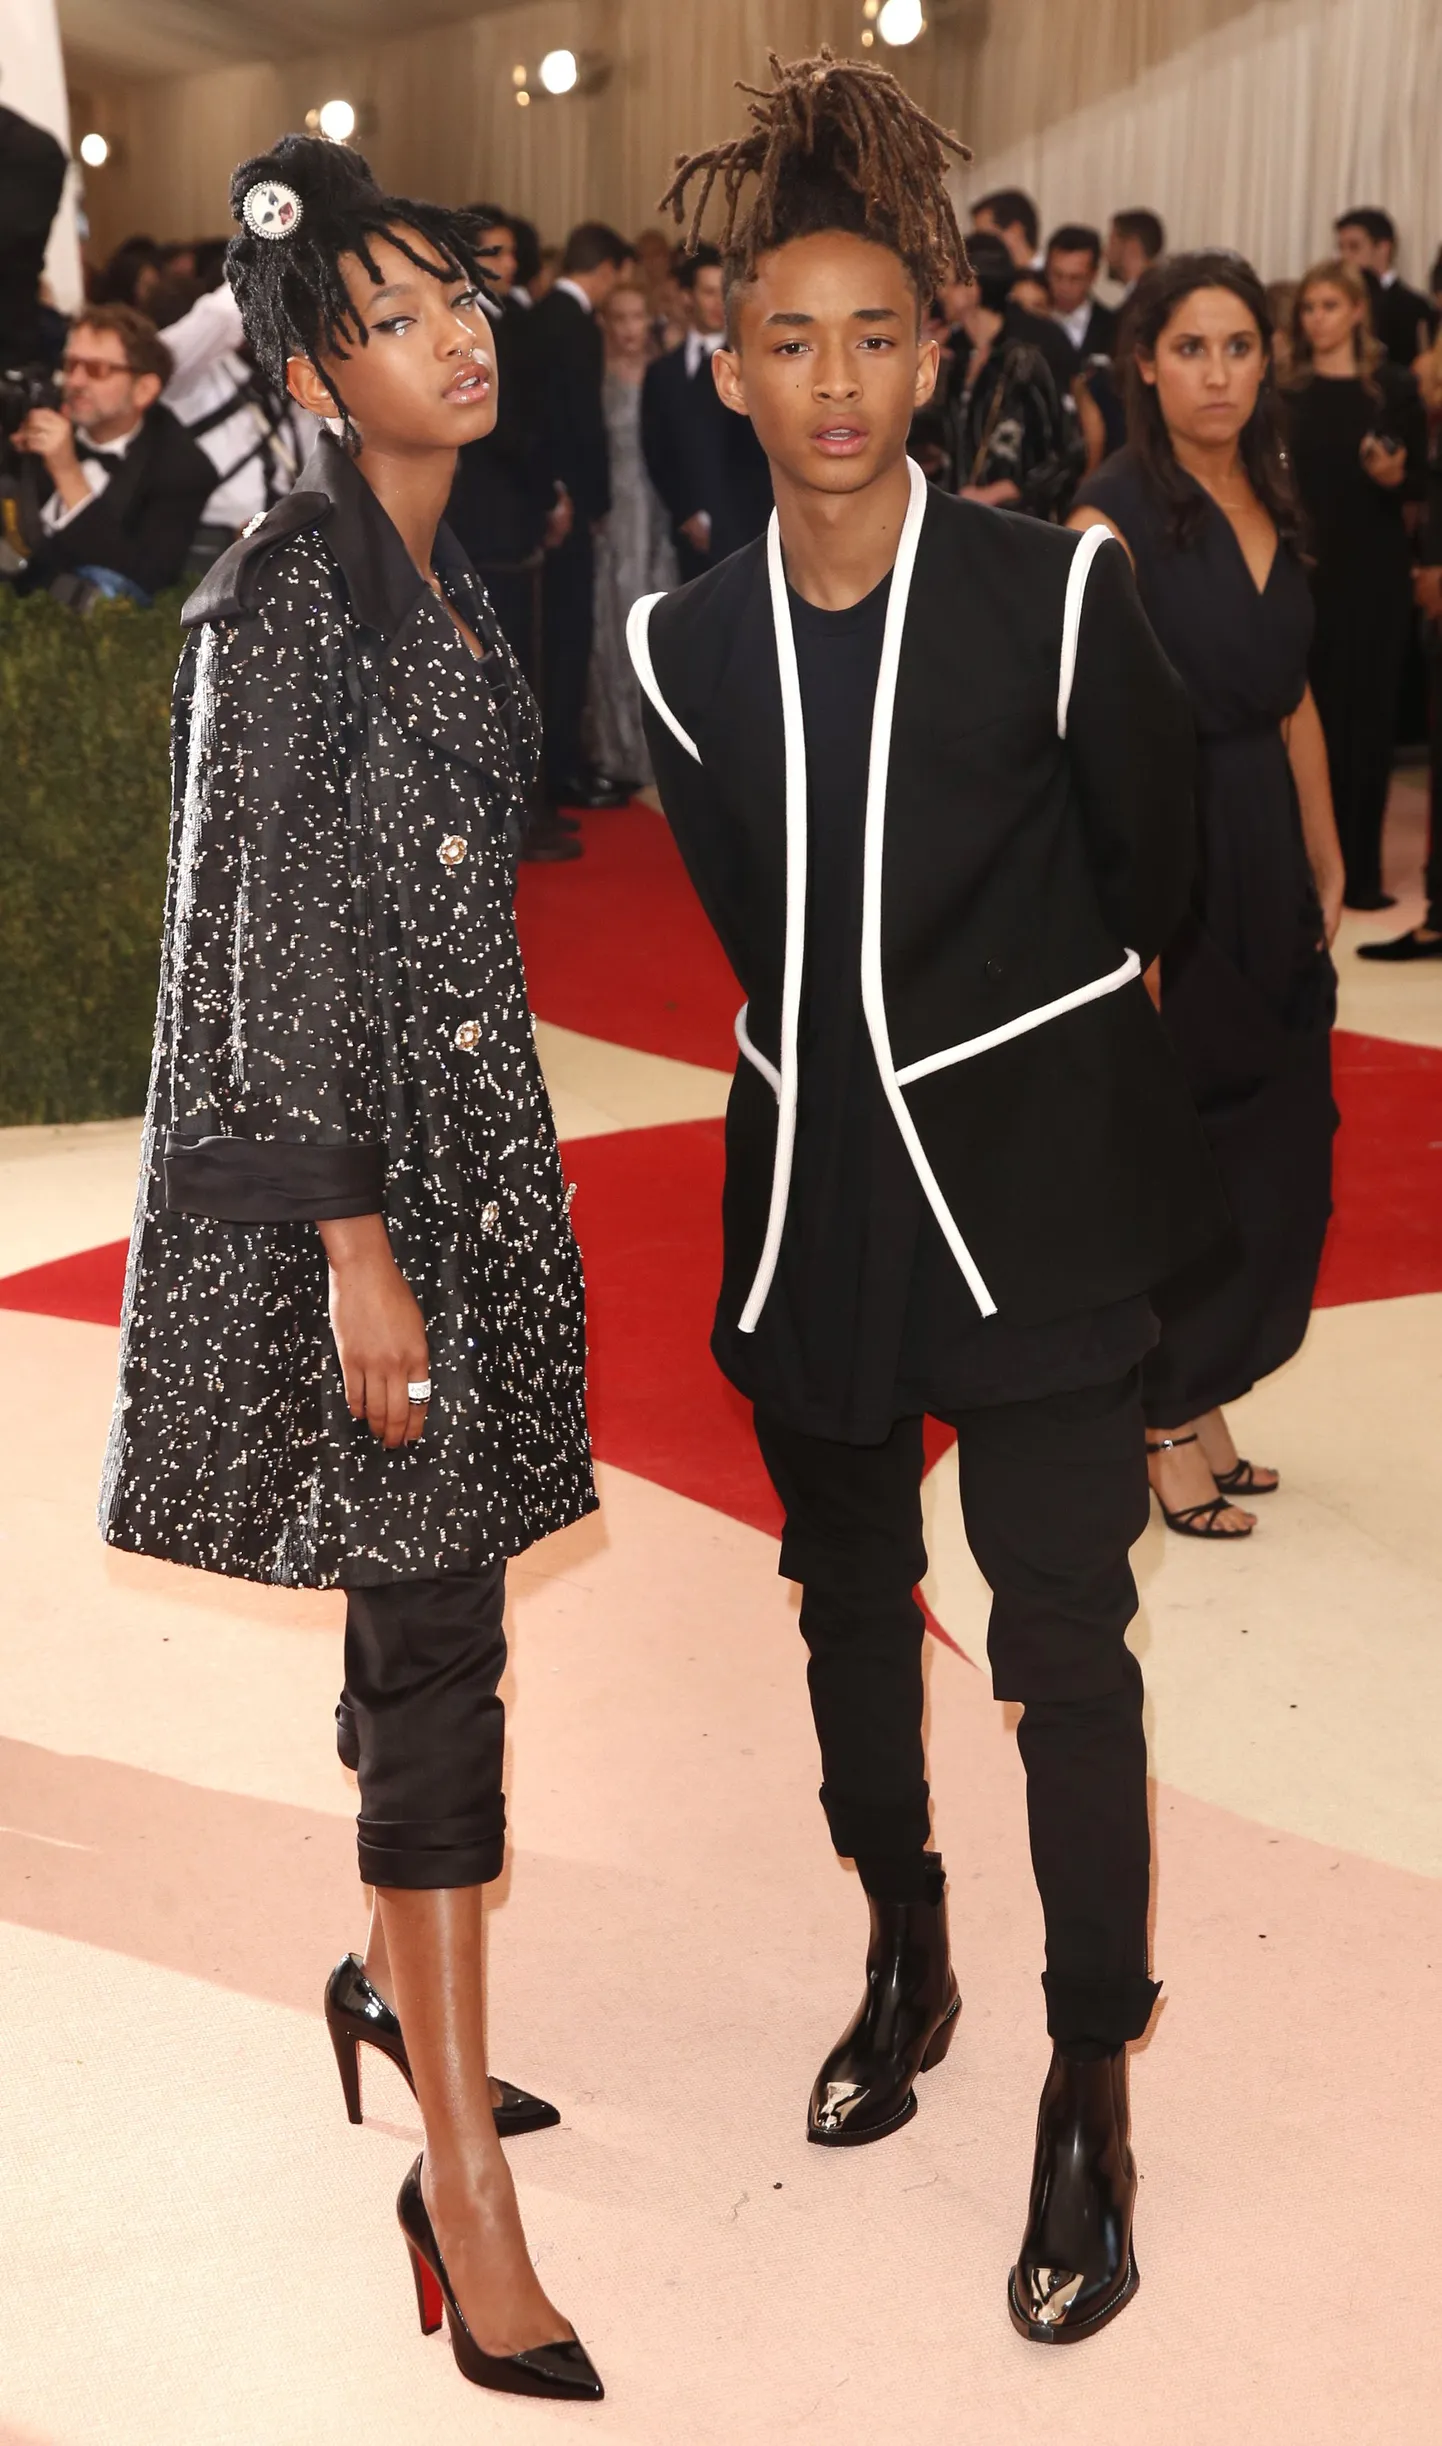 Performers Willow Smith (L) and Jaden Smith arrive at the Metropolitan Museum of Art Costume Institute Gala (Met Gala) to celebrate the opening of "Manus x Machina: Fashion in an Age of Technology" in the Manhattan borough of New York, May 2, 2016. REUTERS/Lucas Jackson